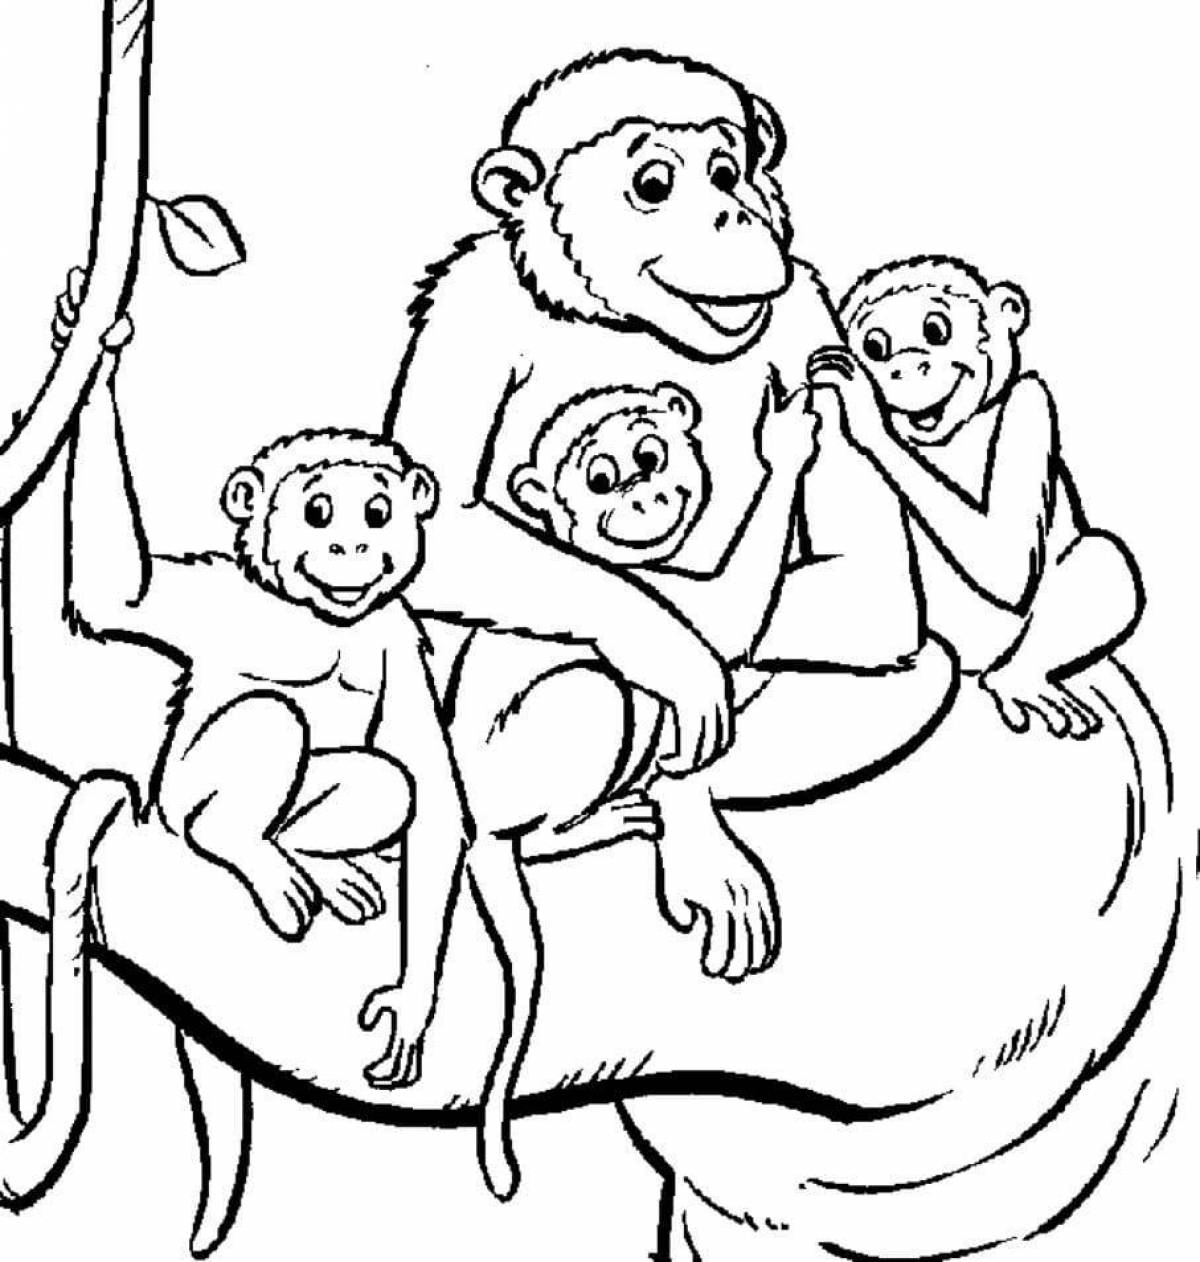 Cute monkey coloring book